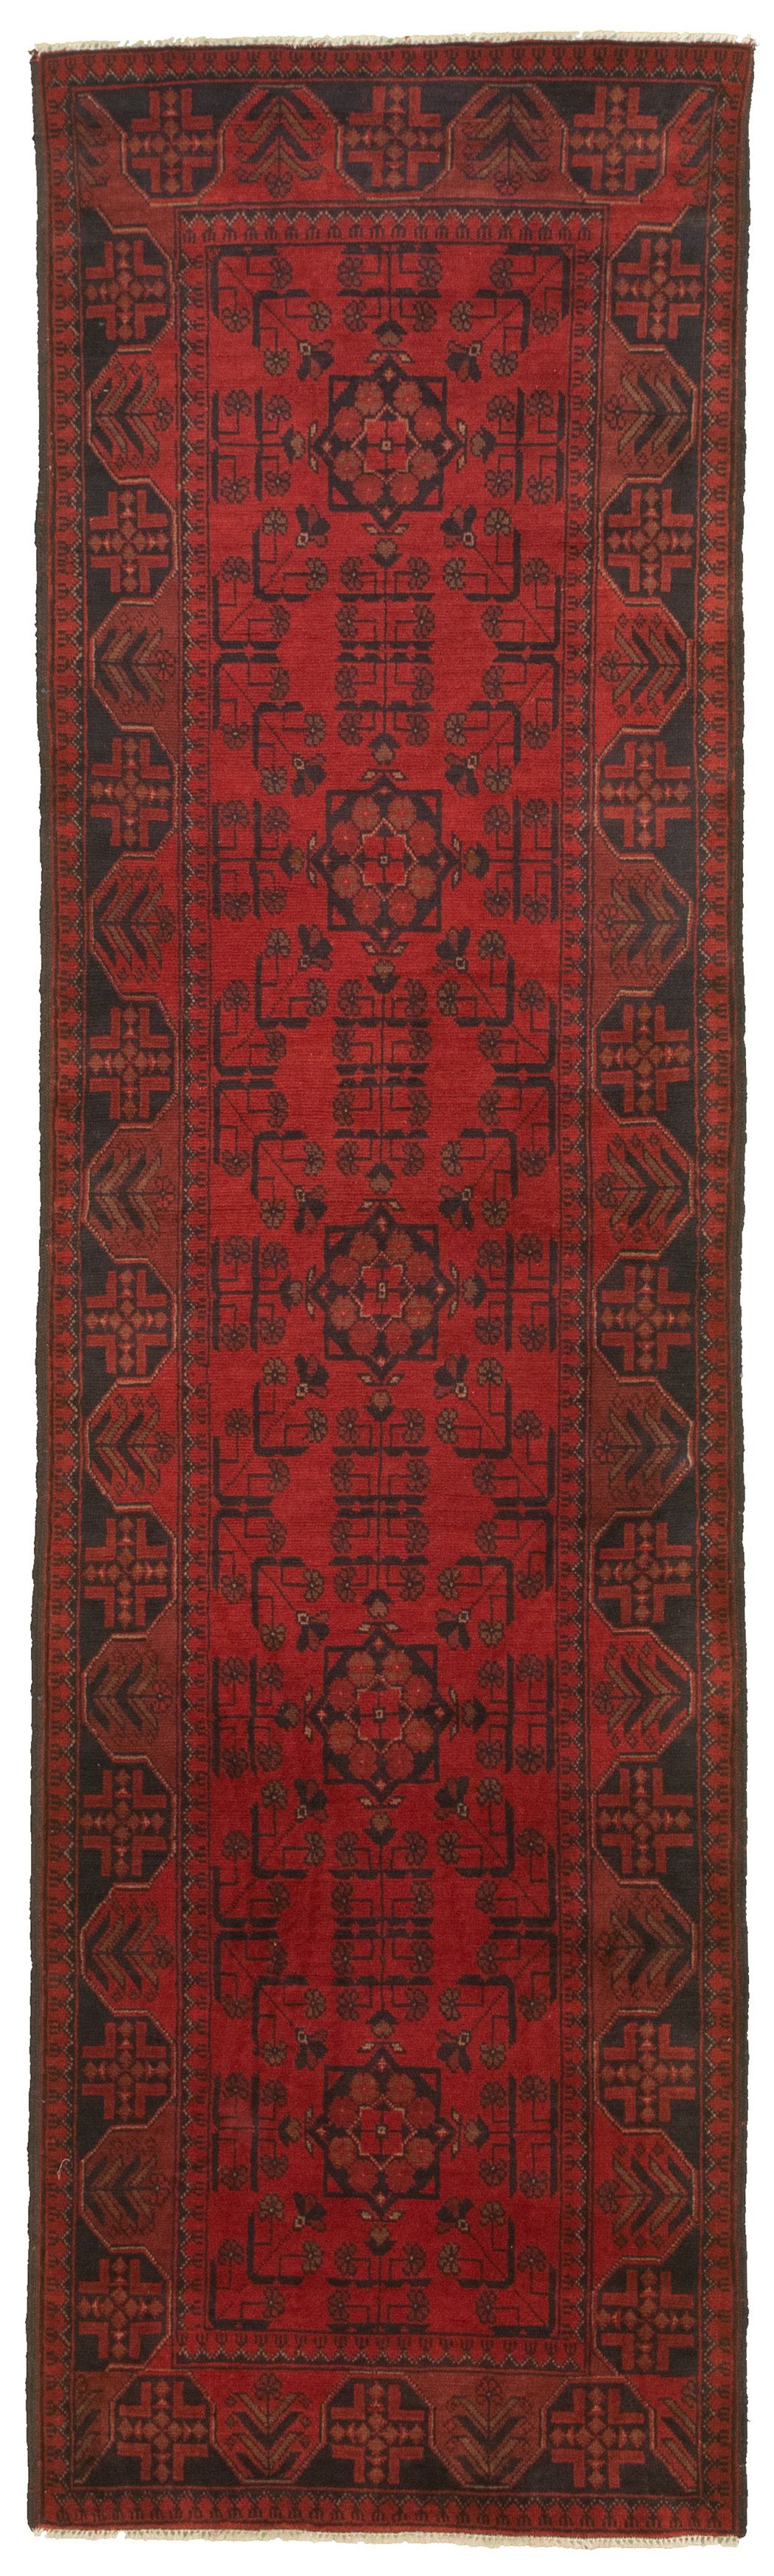 Hand-knotted Finest Khal Mohammadi Red  Rug 2'8" x 9'8" Size: 2'7" x 9'8"  